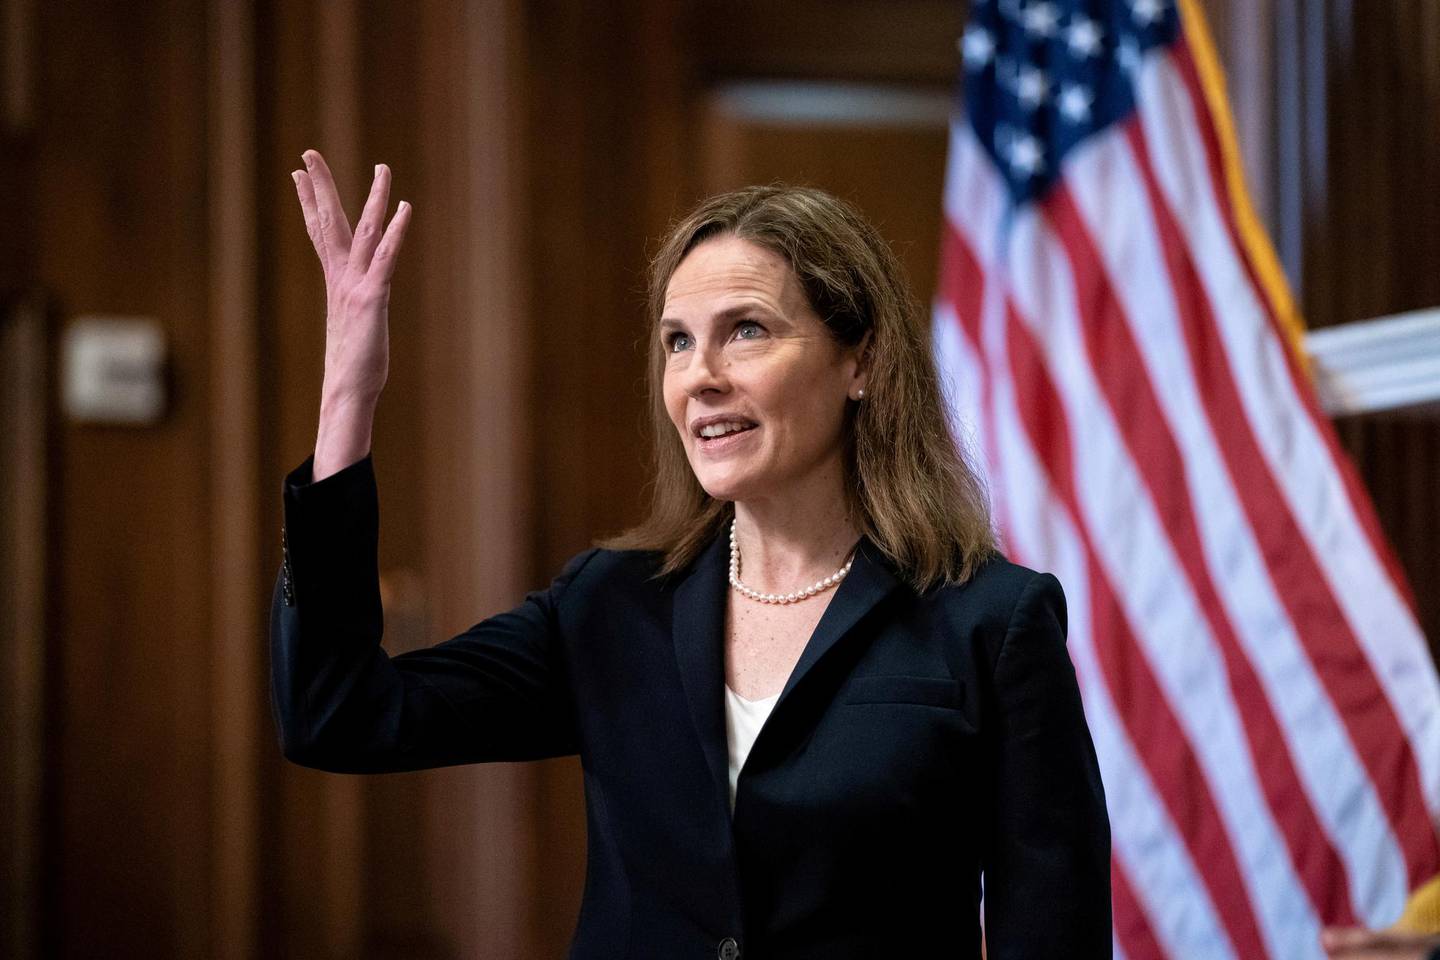 FILE PHOTO: Judge Amy Coney Barrett, U.S. President Donald Trump's Nominee for Supreme Court, gestures during a photo before a meeting with Senator Roy Blunt (R-Mo) on Capitol Hill in Washington DC, U.S. October 21, 2020. Anna Moneymaker/Pool via REUTERS/File Photo